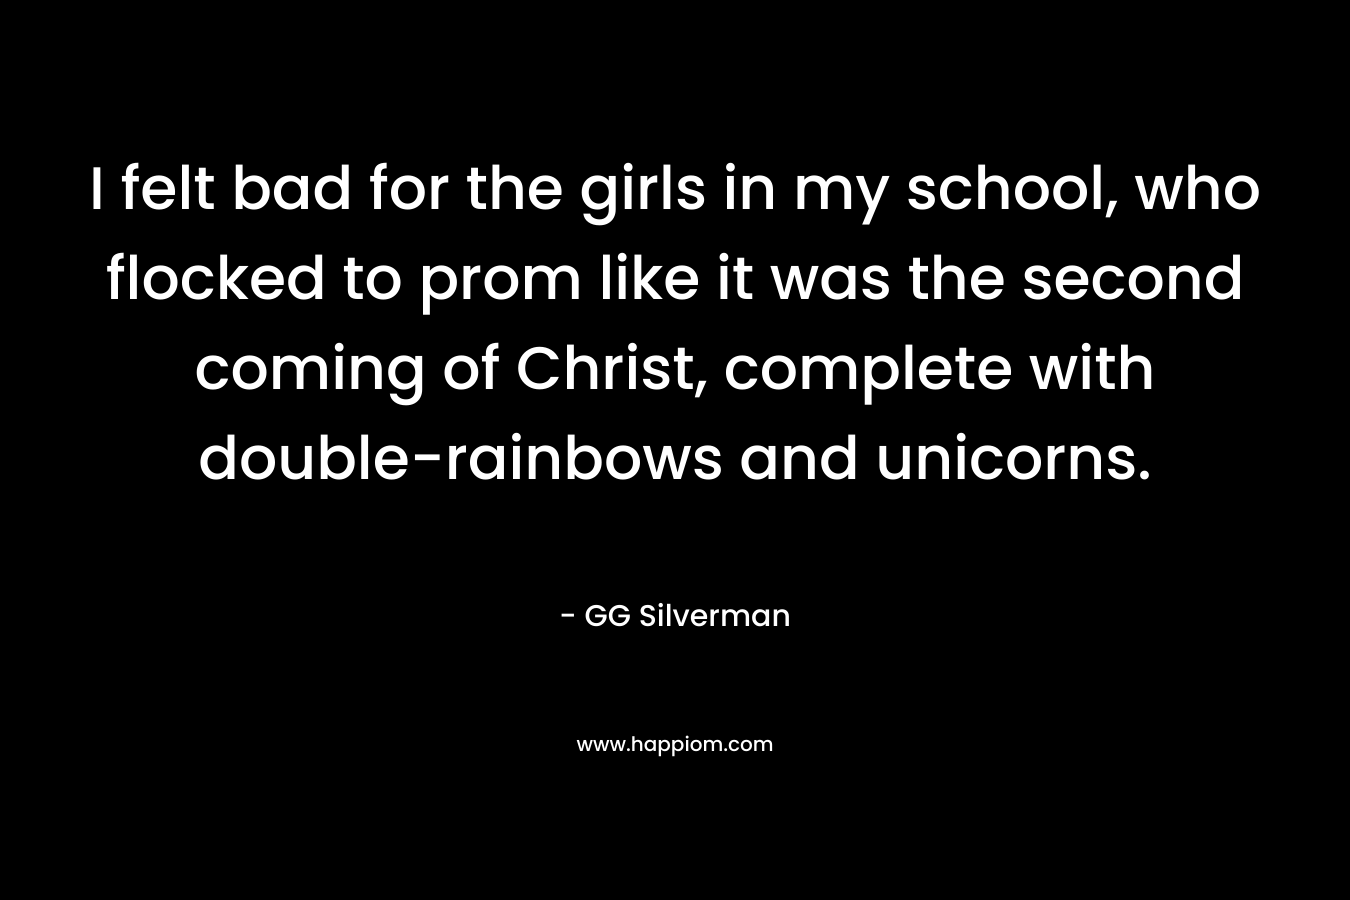 I felt bad for the girls in my school, who flocked to prom like it was the second coming of Christ, complete with double-rainbows and unicorns. – GG Silverman